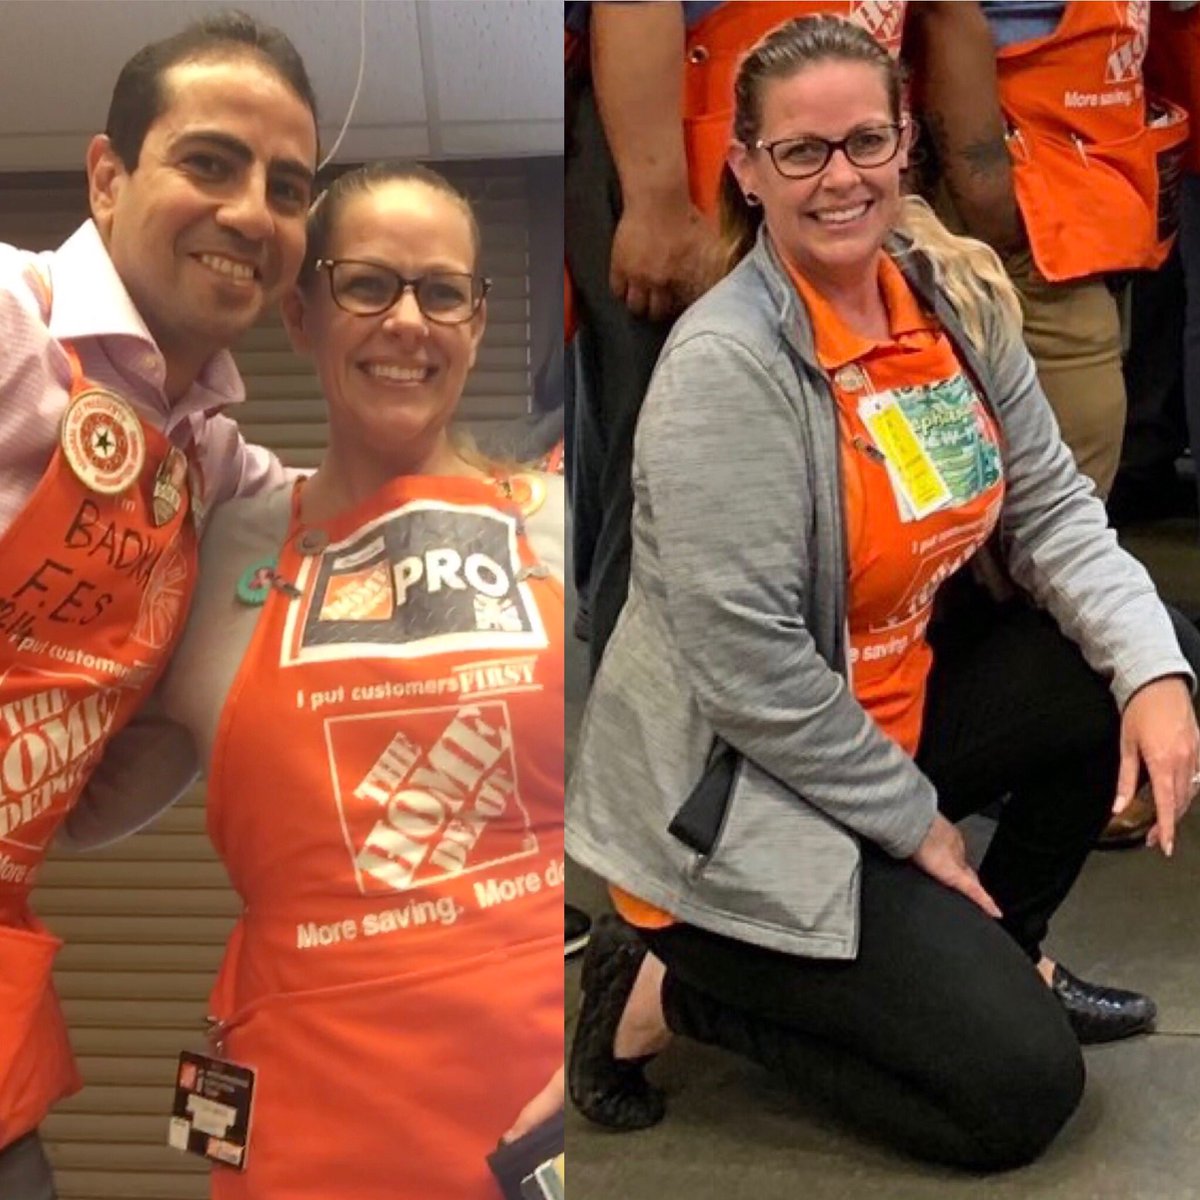 Happy 3rd Anniversary to our beloved Stephanie. We are so blessed to have such an #amazing_DHRM like her in our district #332 #AcesNYM @HomeDepotSteph @SL_leighton @nafizaalli @viclo51314168 @kathyllapa @Lester0421214 @Brandon_Asm1214